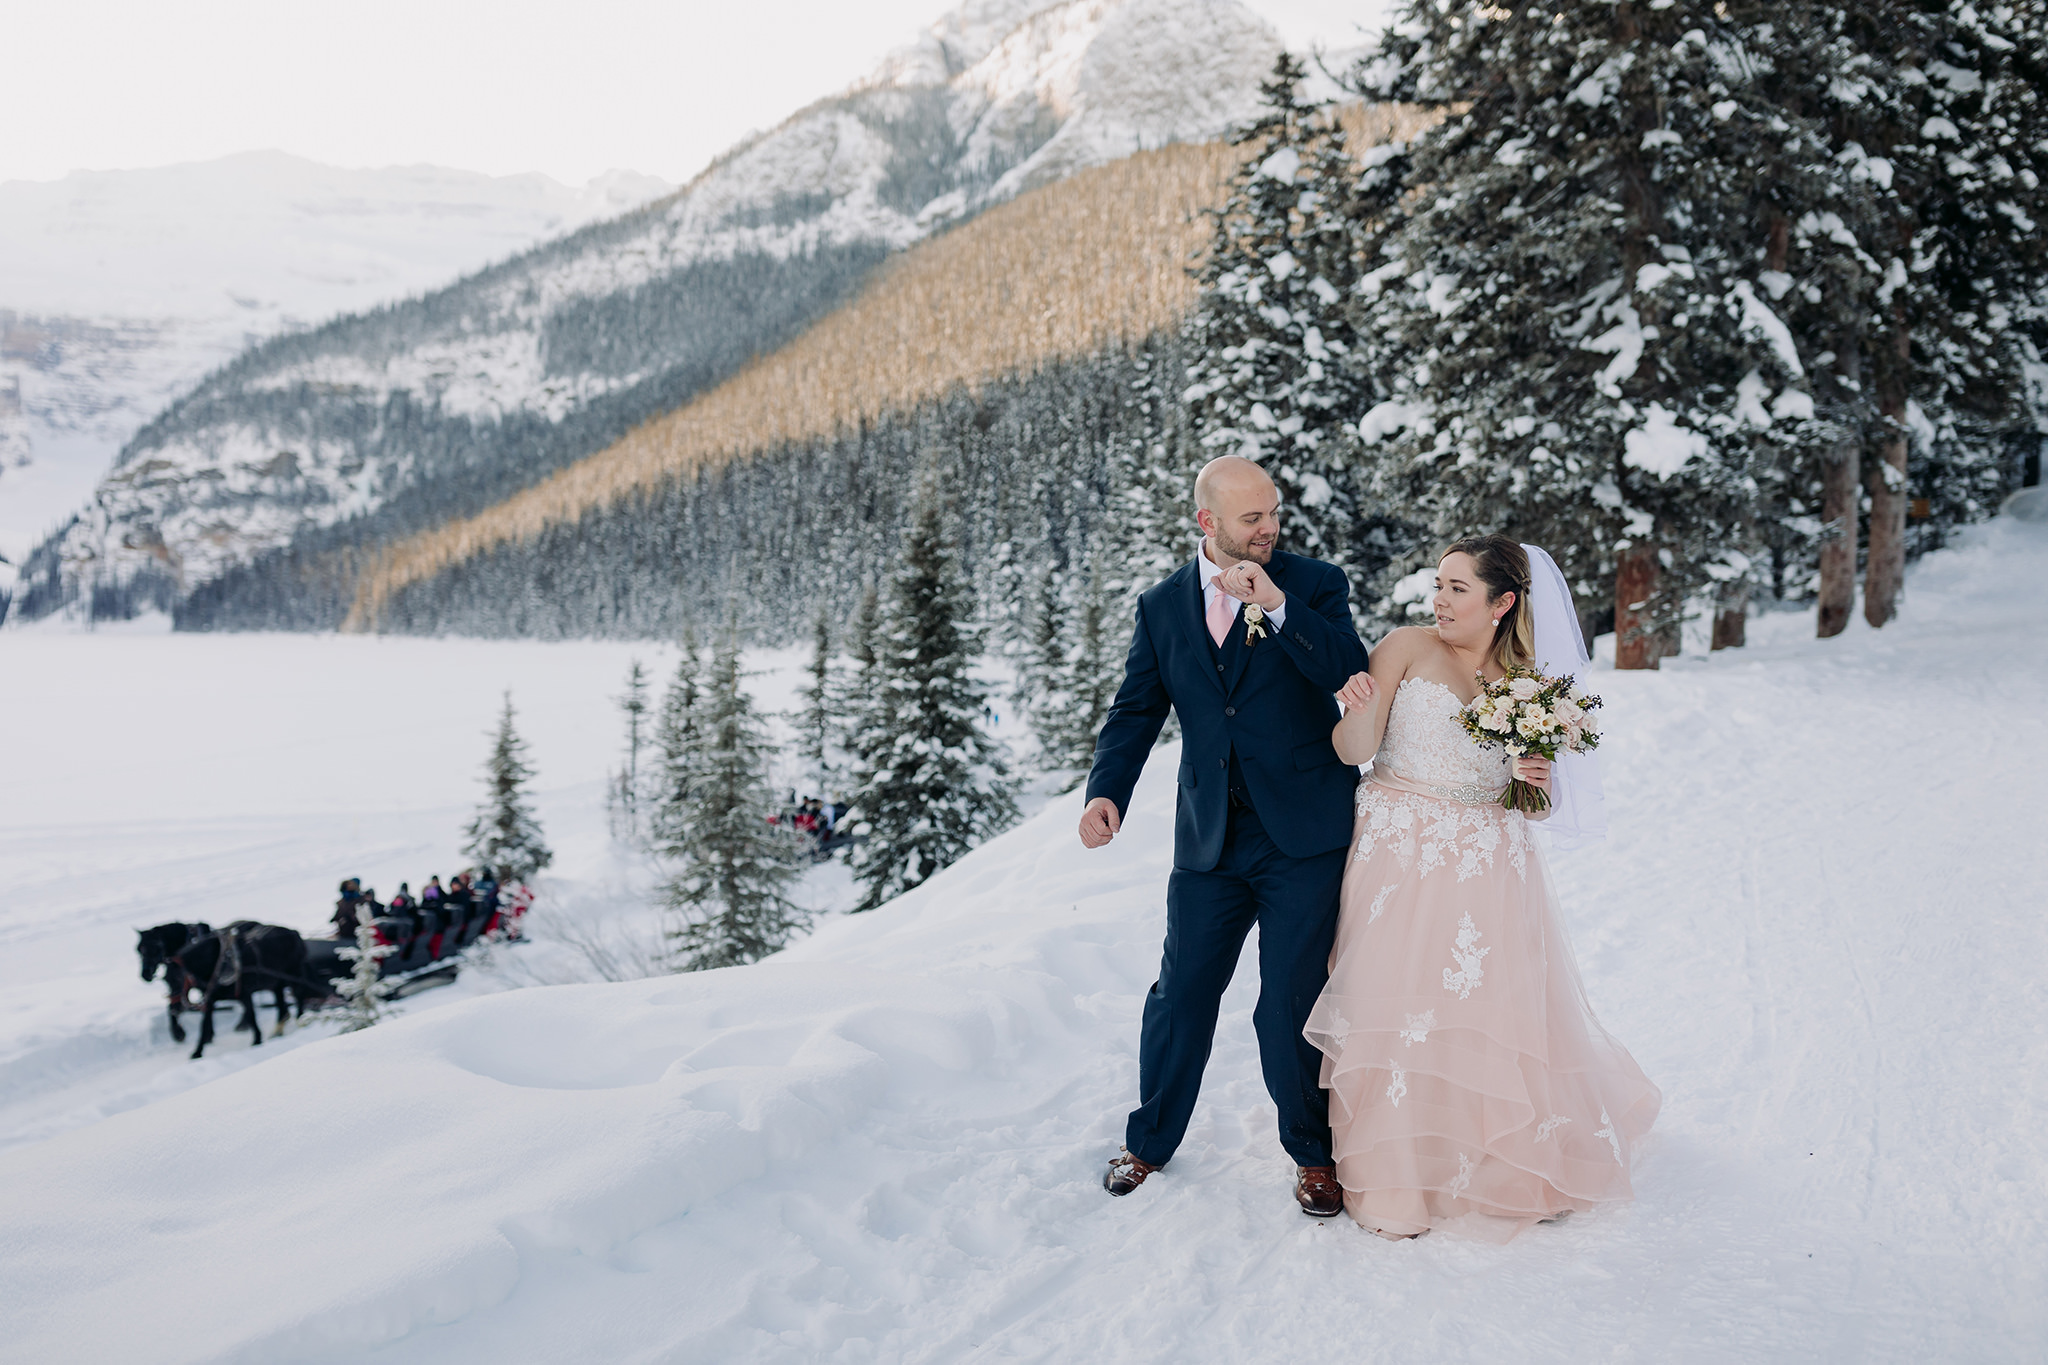 Lake Louise winter elopement on frozen Lake Louise with Bride in pink wedding dress in winter wonderland Super snowy elopement wedding photographed by ENV Photography